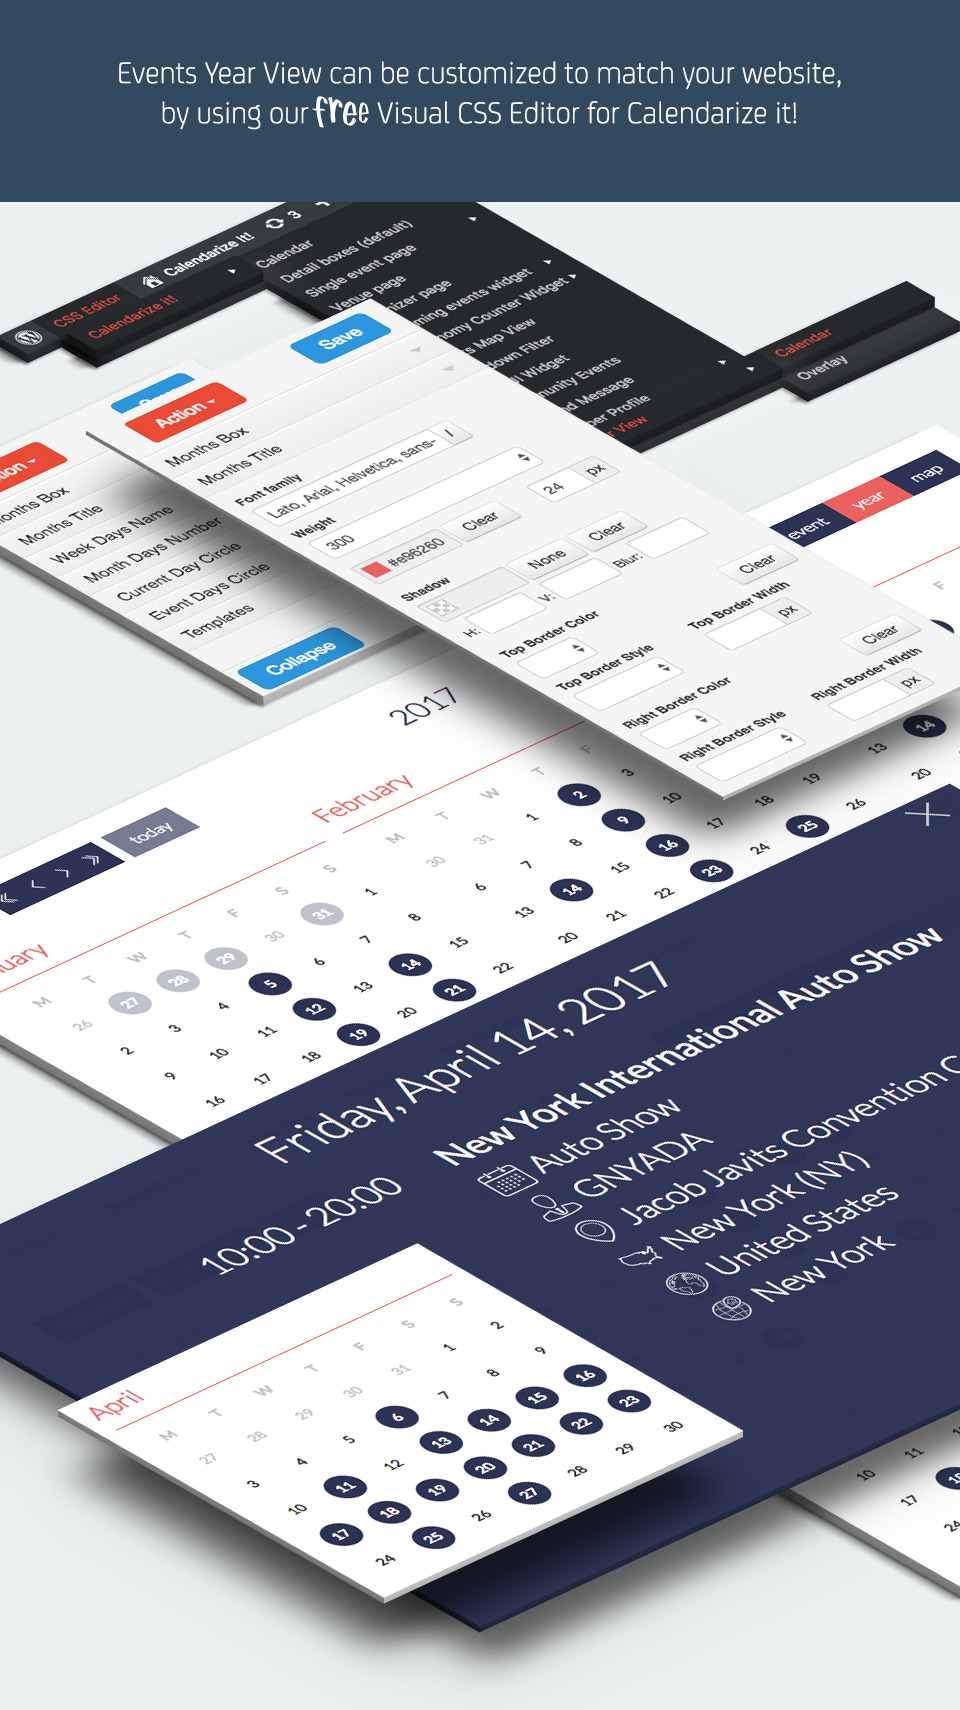 Events Year View for Calendarize it! - Create your own style with Visual CSS Editor